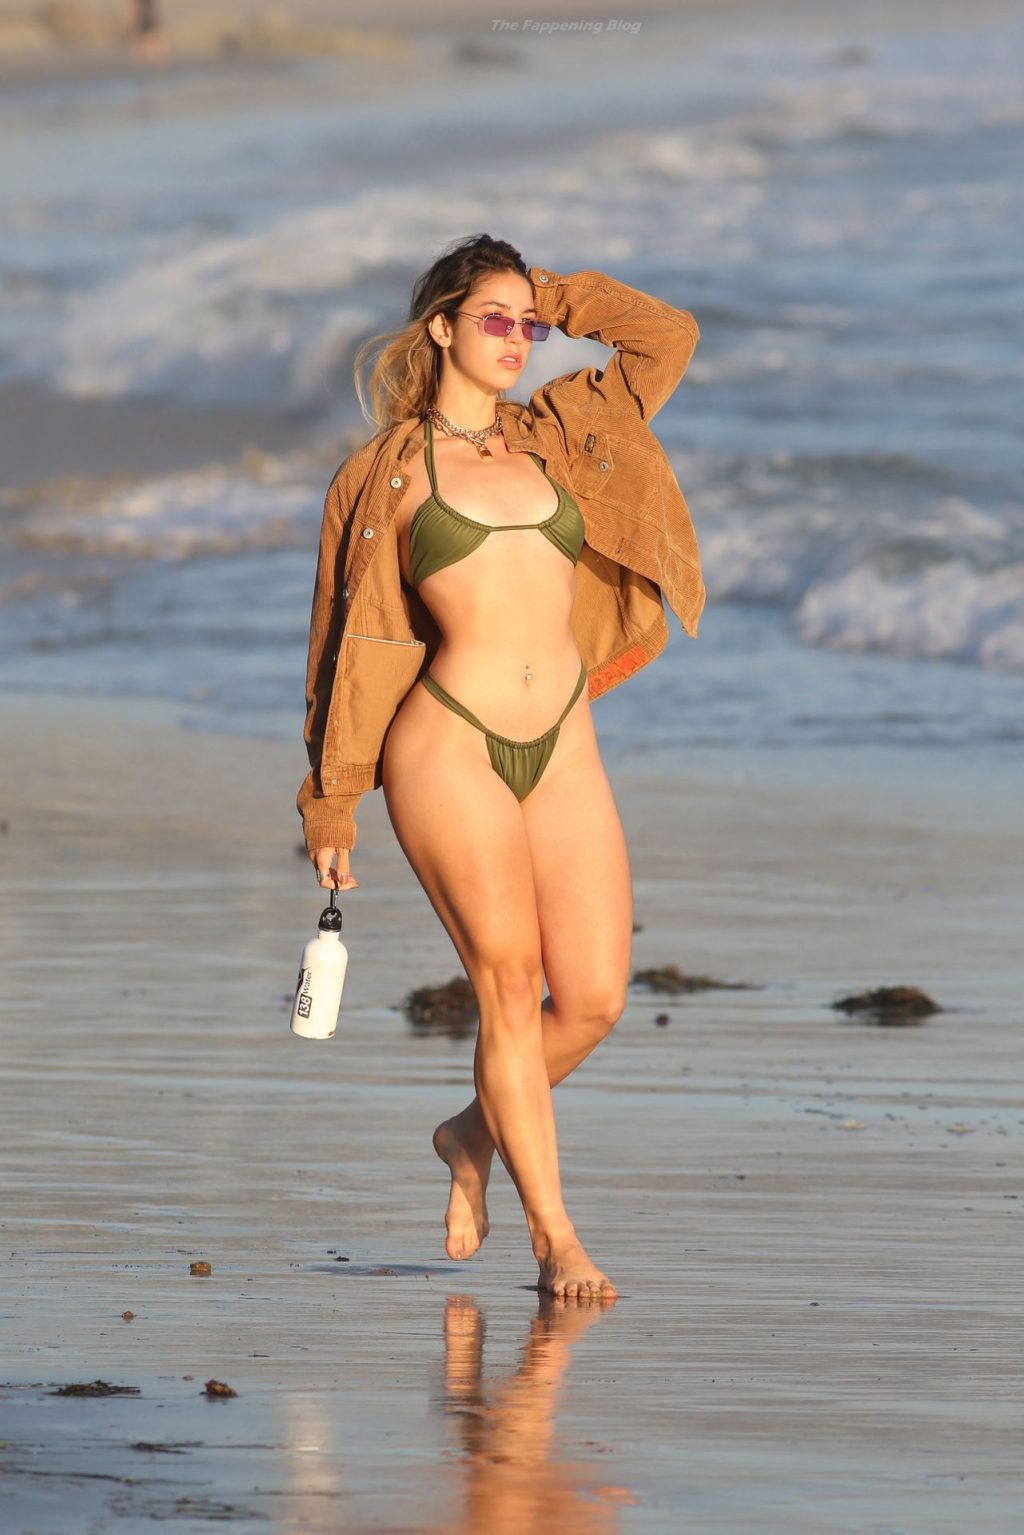 Bridgette Audrey Shows Off Her Sexy Bikini Body While Modeling for 138 Water in Malibu (57 Photos)